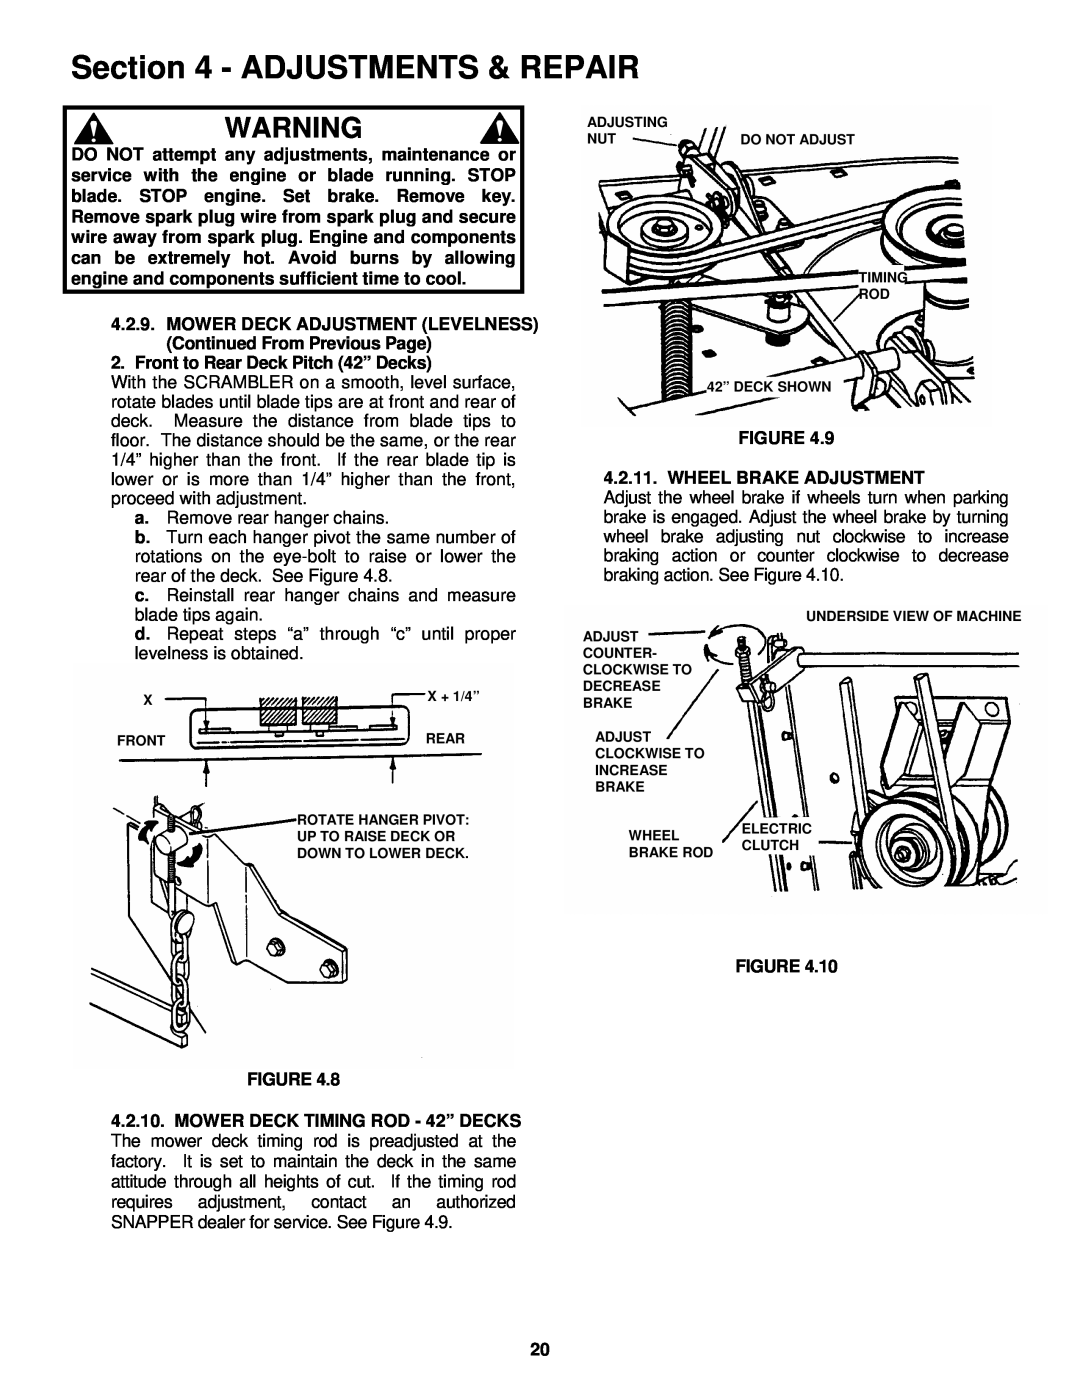 Snapper YZ18426BVE, YZ20486BVE important safety instructions Adjustments & Repair, a. Remove rear hanger chains 